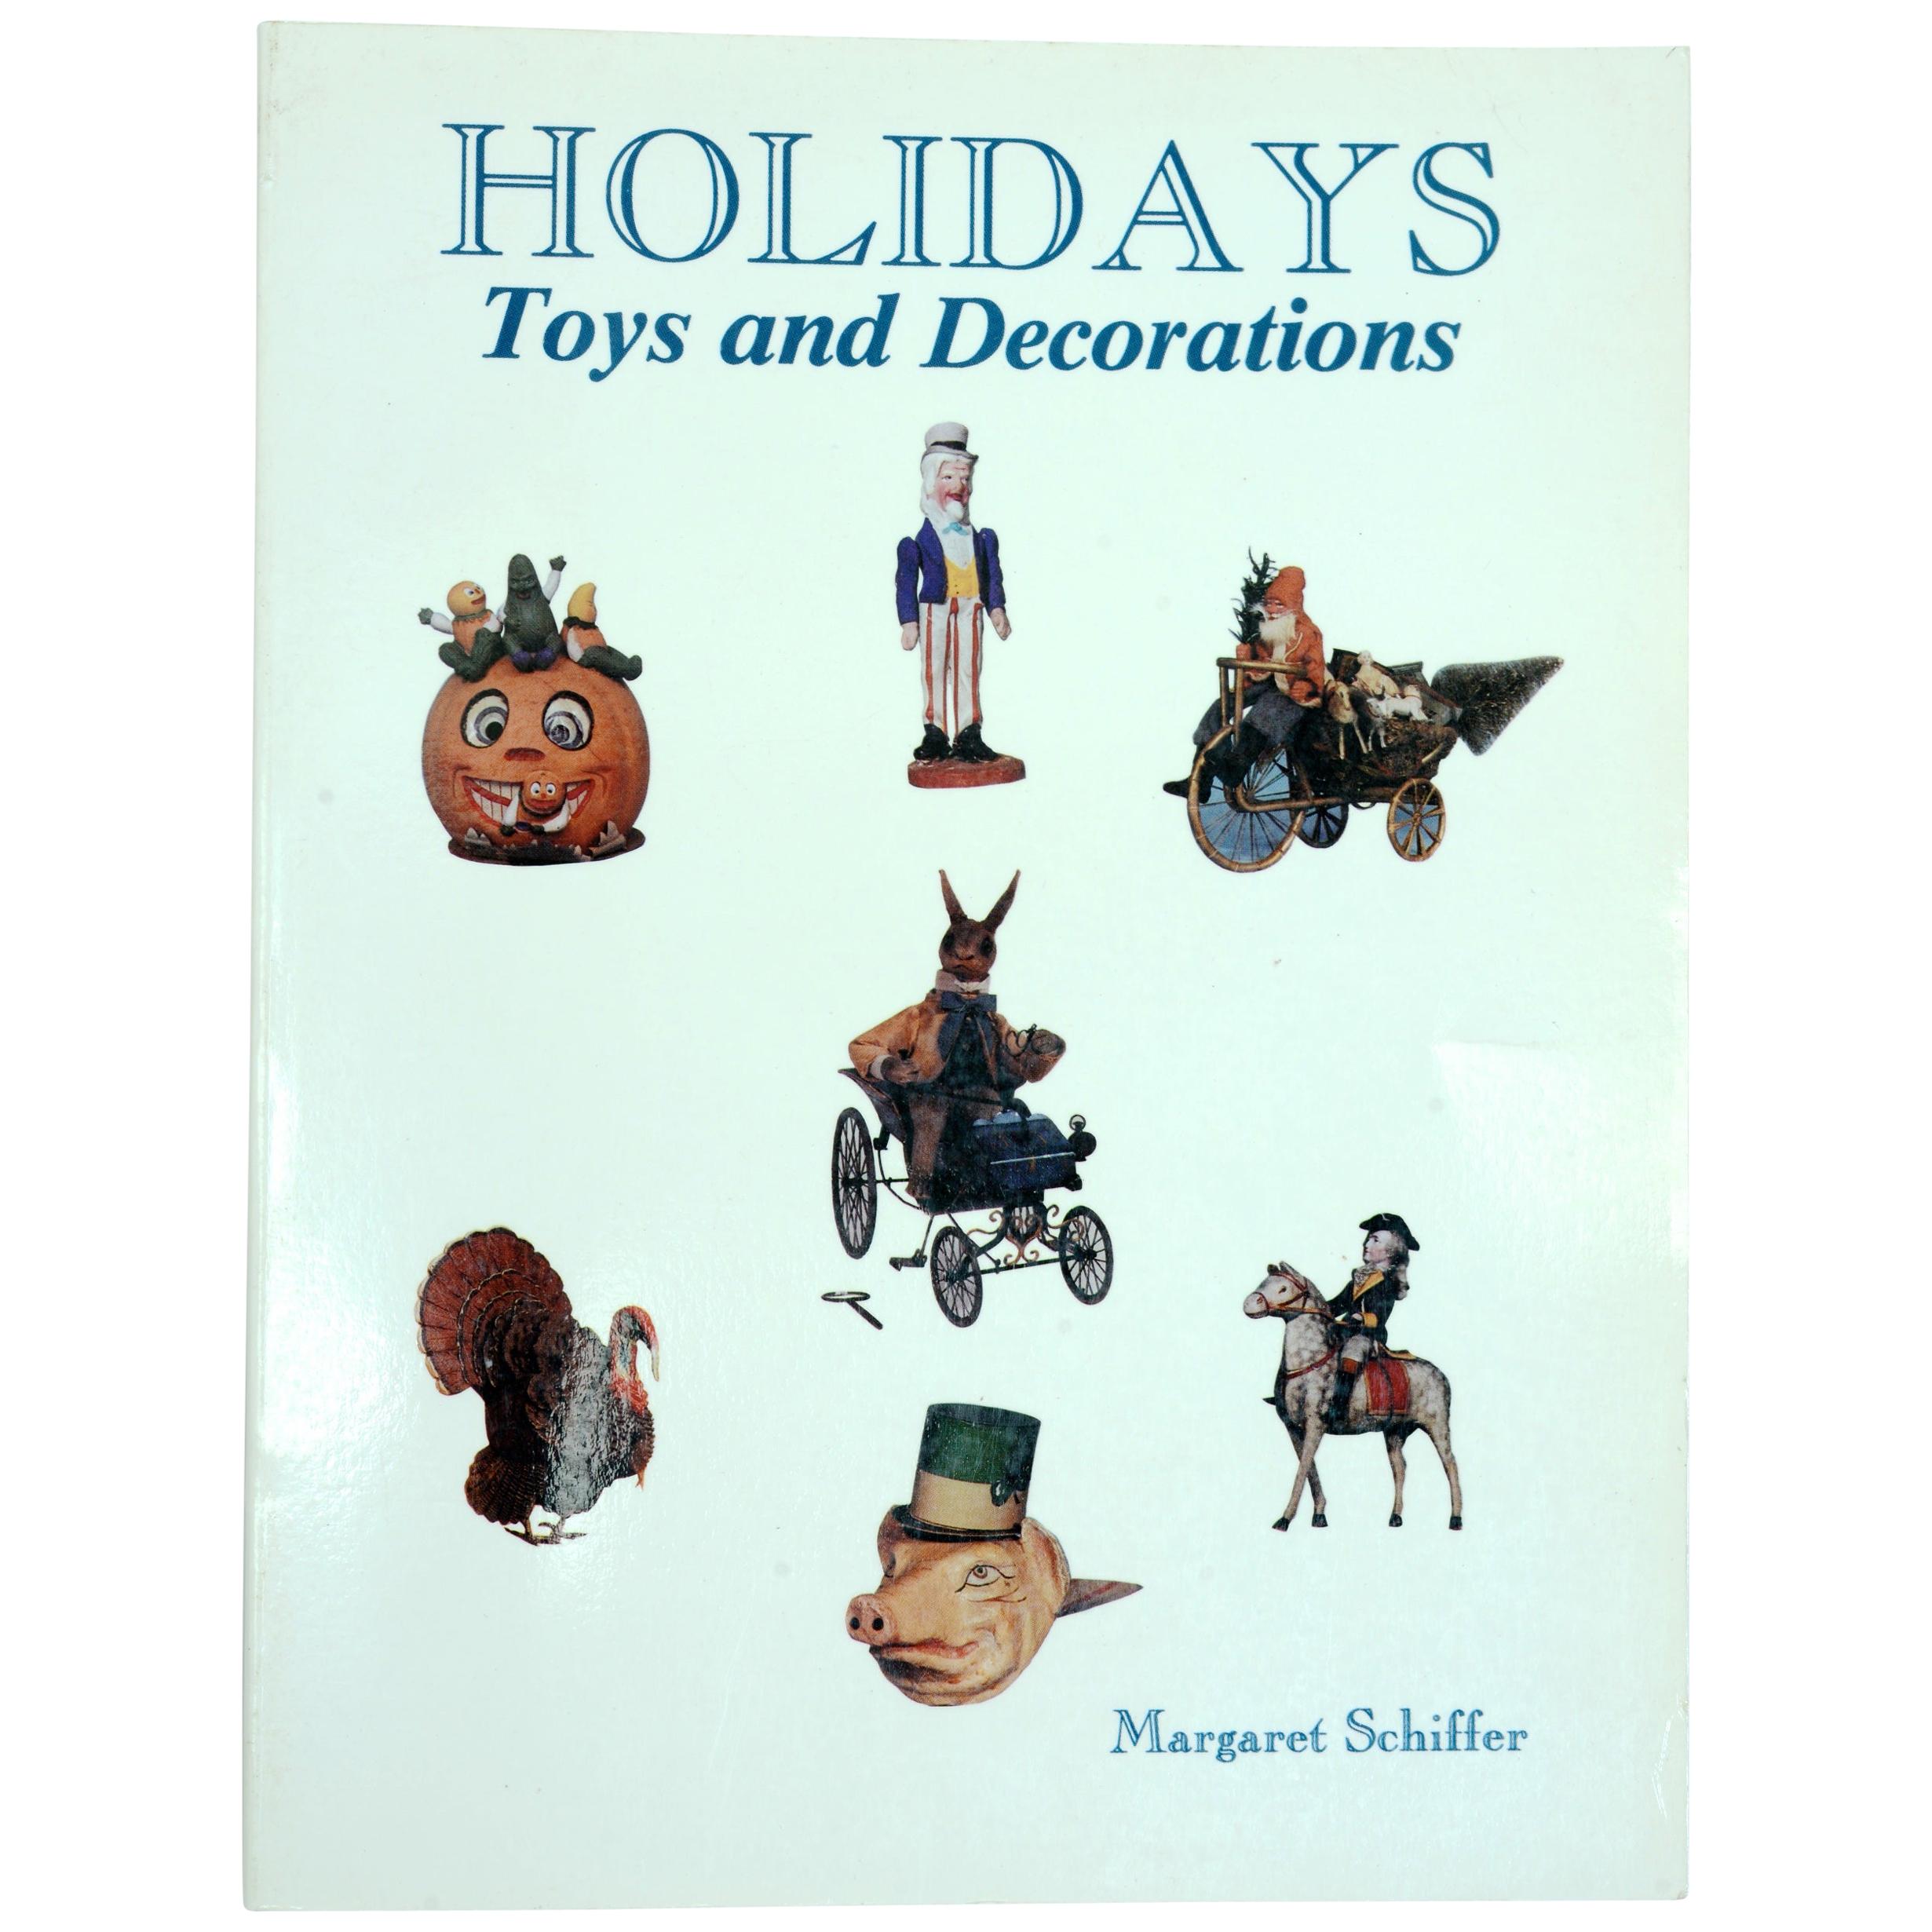 Holidays Toys and Decorations by Margaret B. Schiffer, First Edition